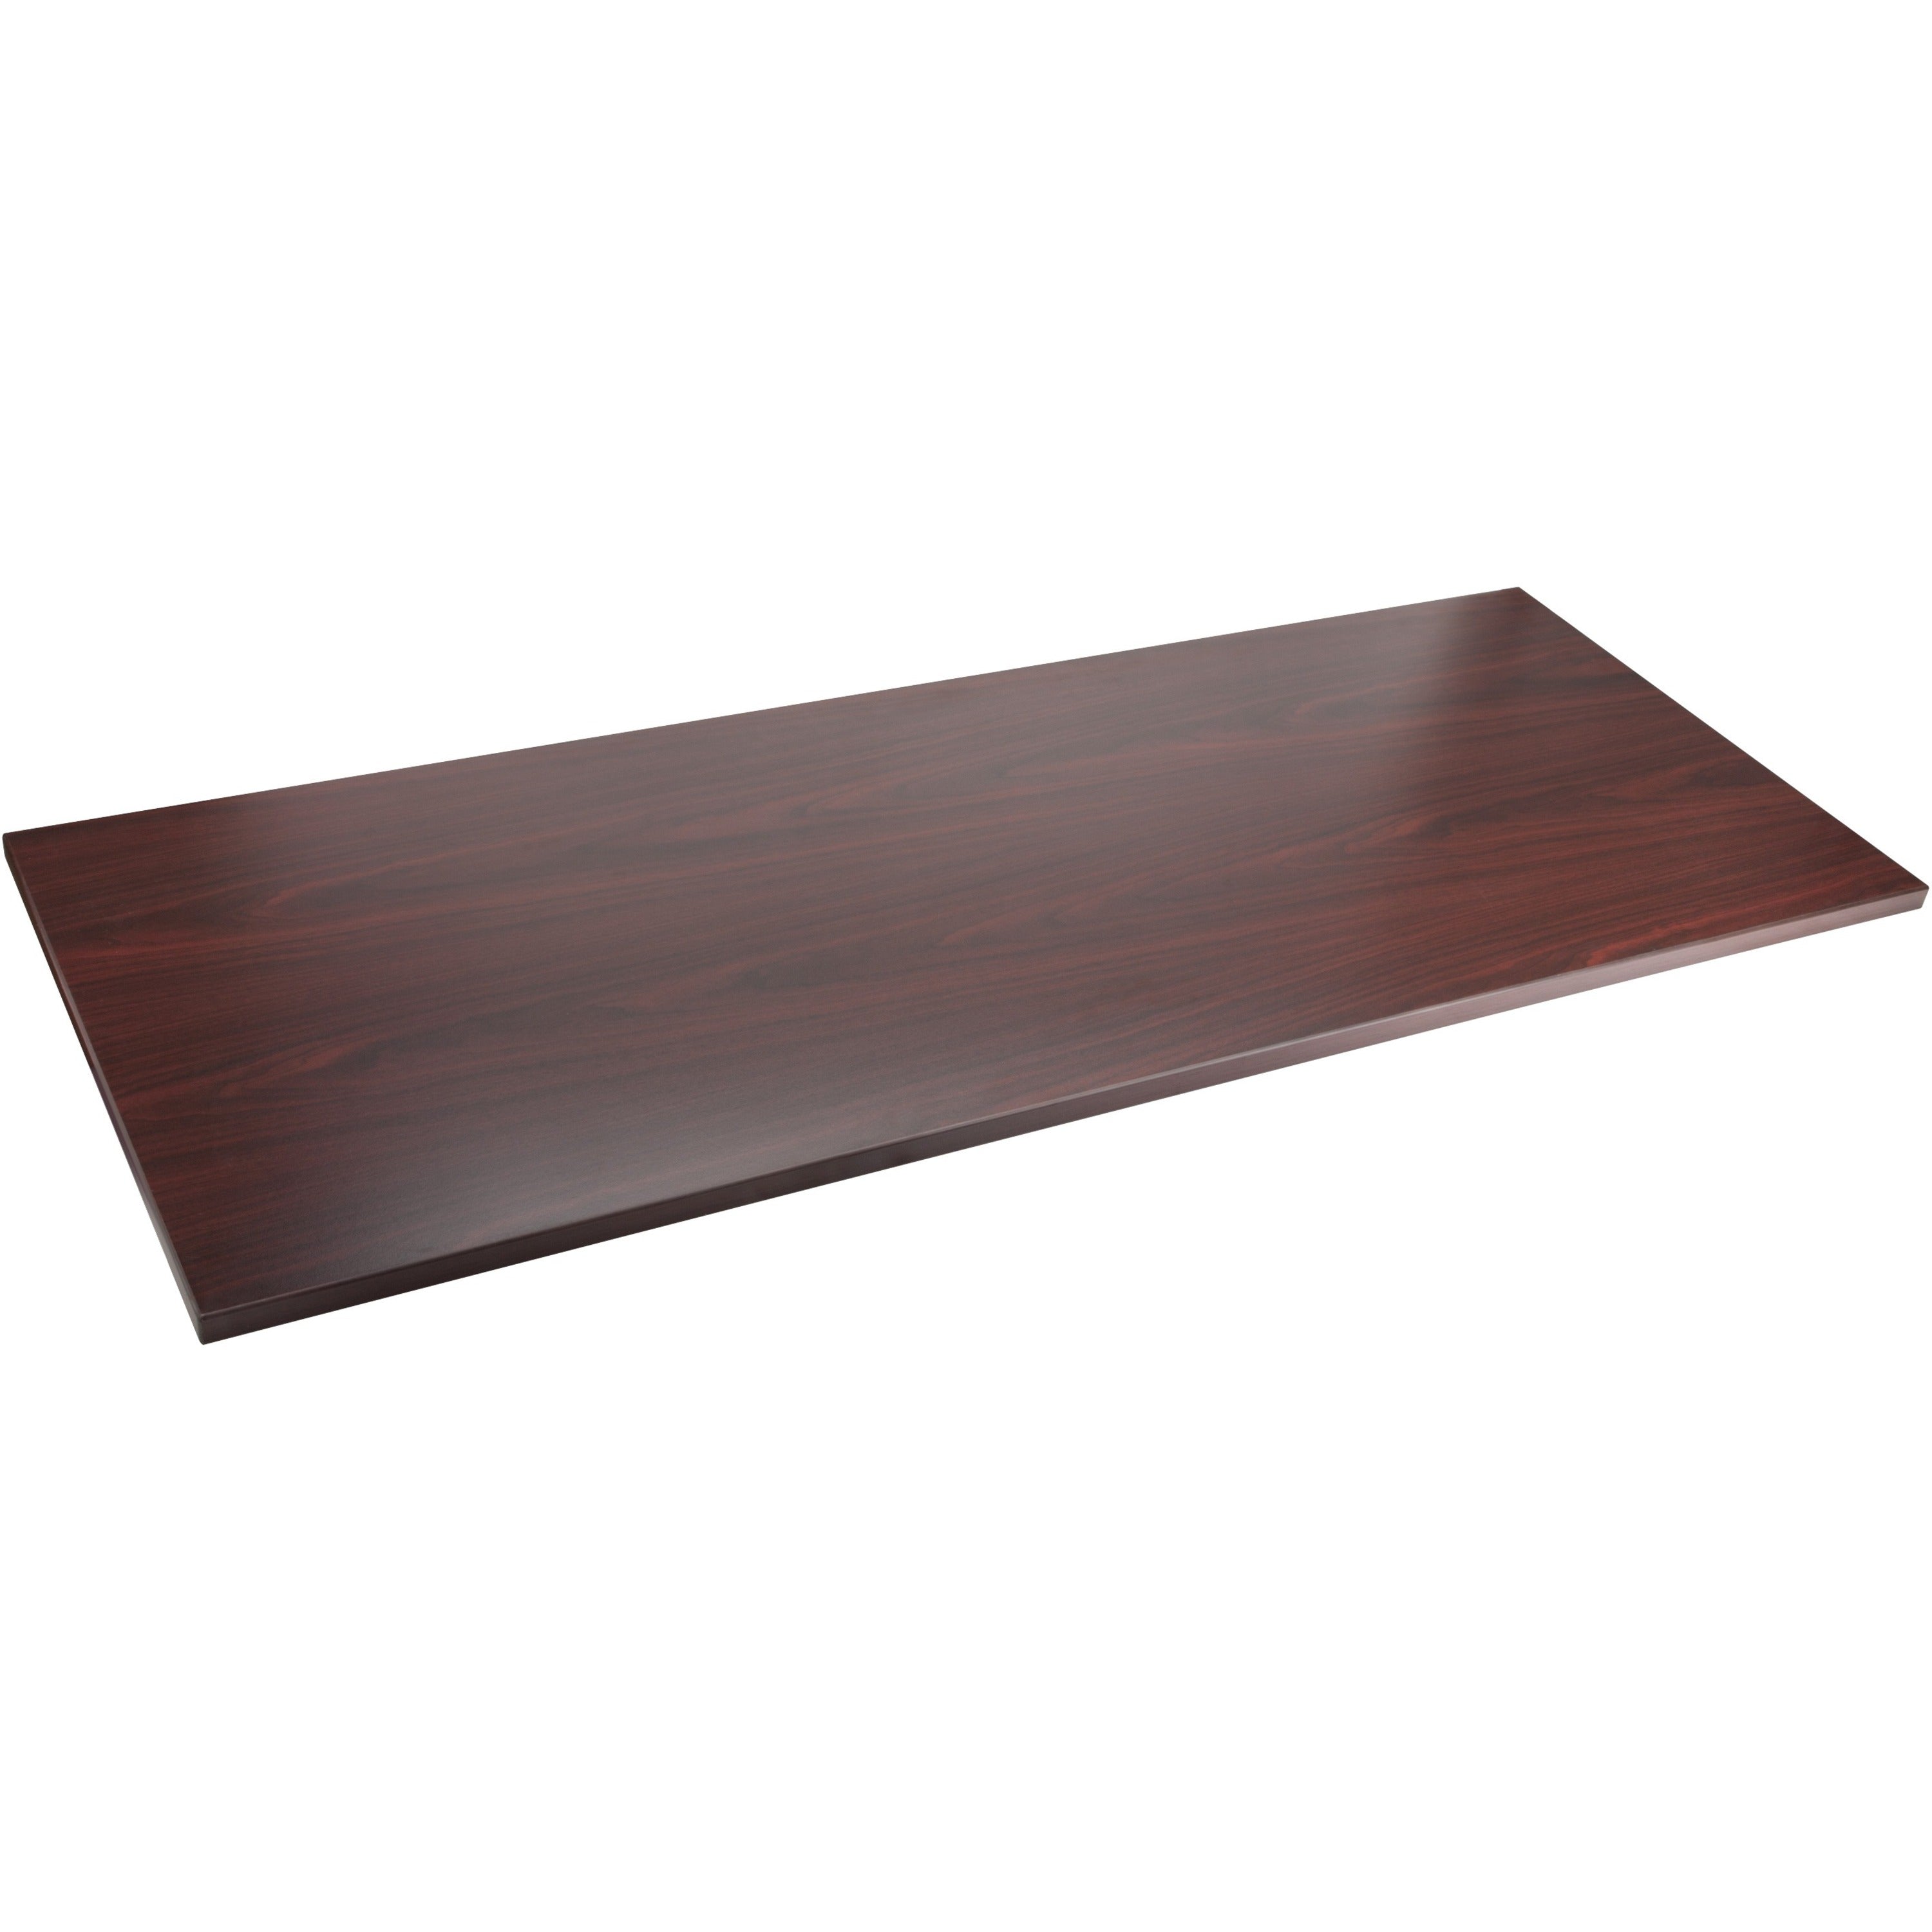 lorell-relevance-series-tabletop-for-table-toprectangle-top-contemporary-style-adjustable-height-x-72-table-top-width-x-30-table-top-depth-x-1-table-top-thickness-assembly-required-mahogany-laminated-1-each_llr34405 - 1